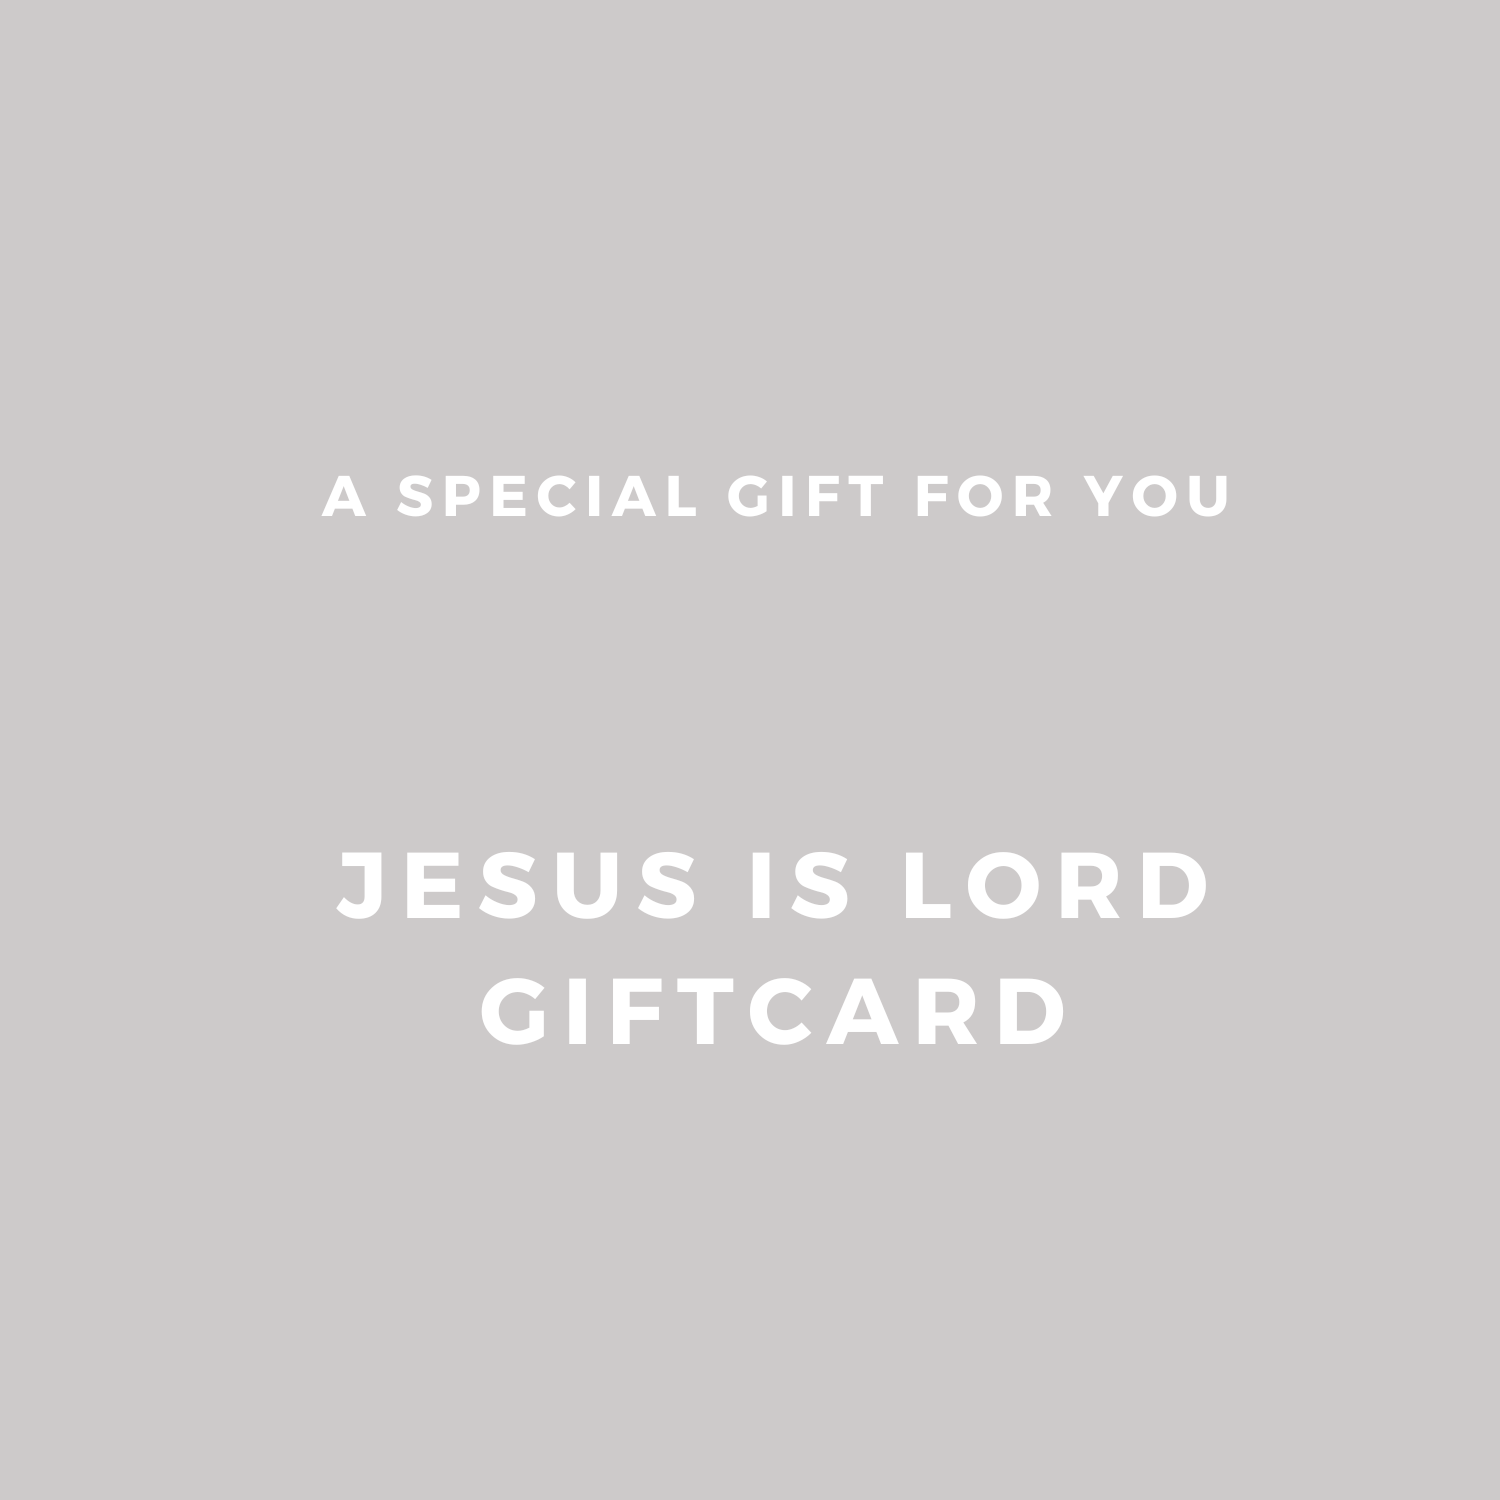 JESUS IS LORD GIFTCARD